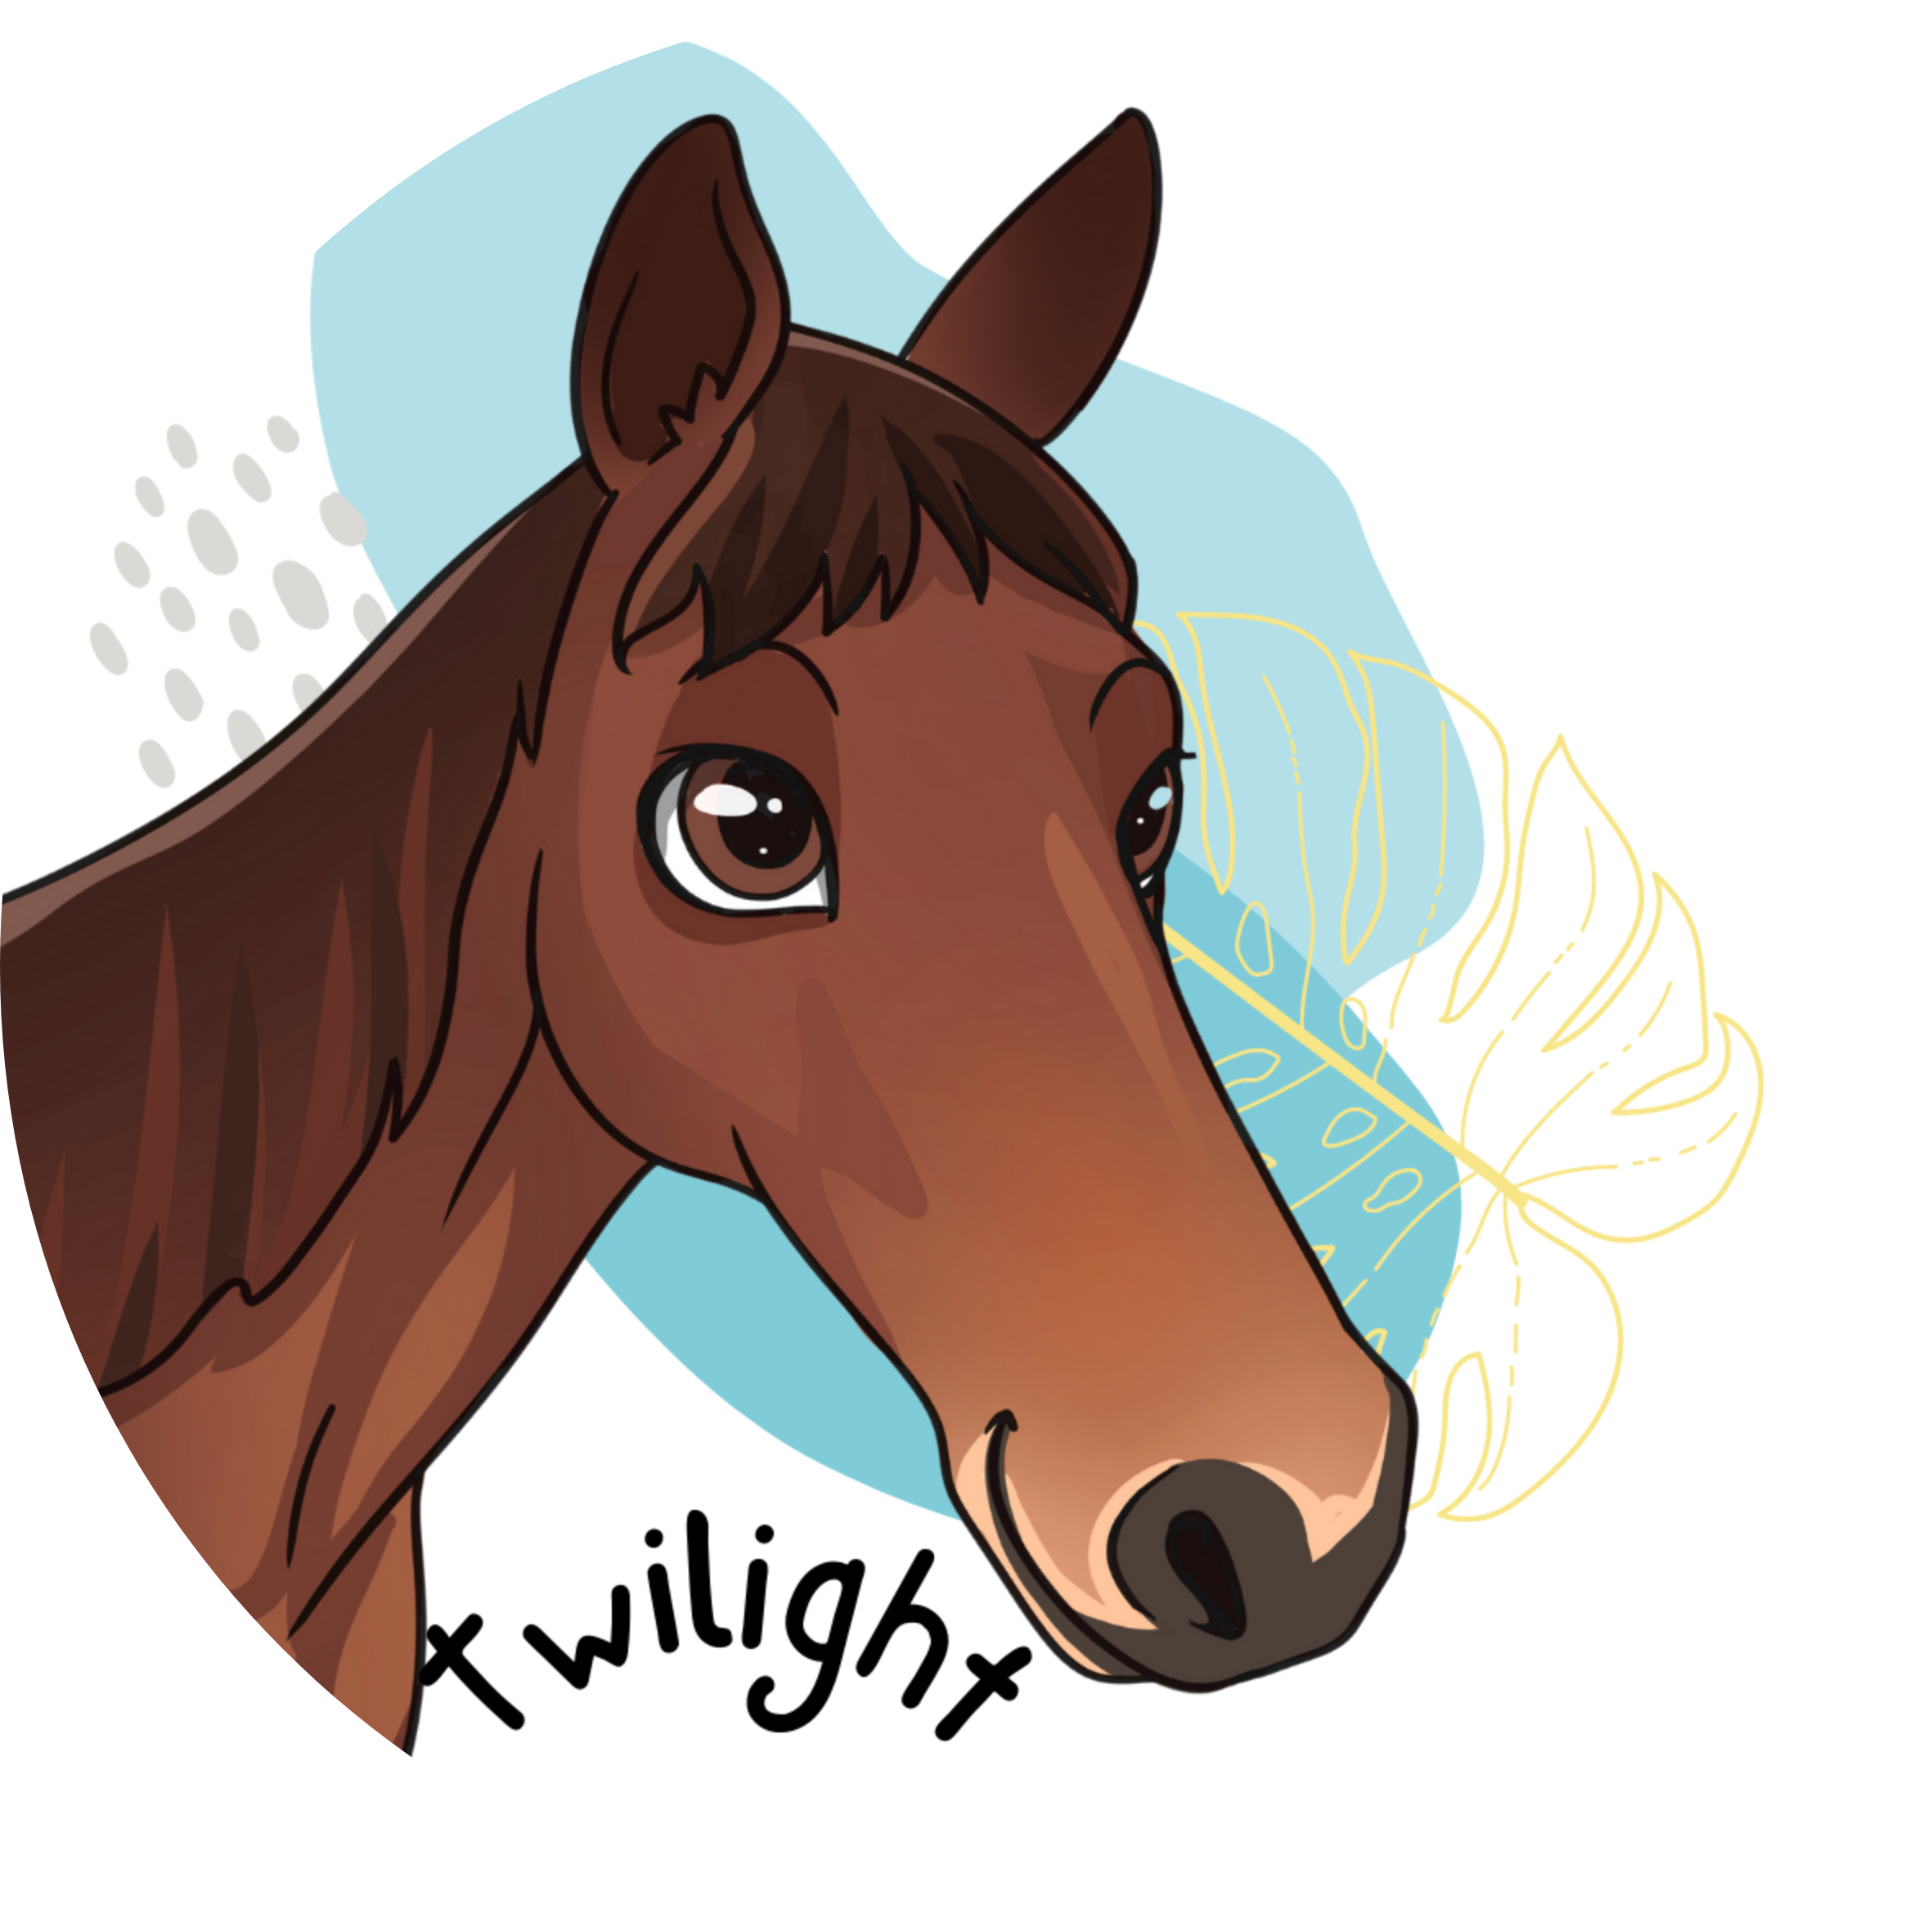 Twilight - Horse sticker .png large.png